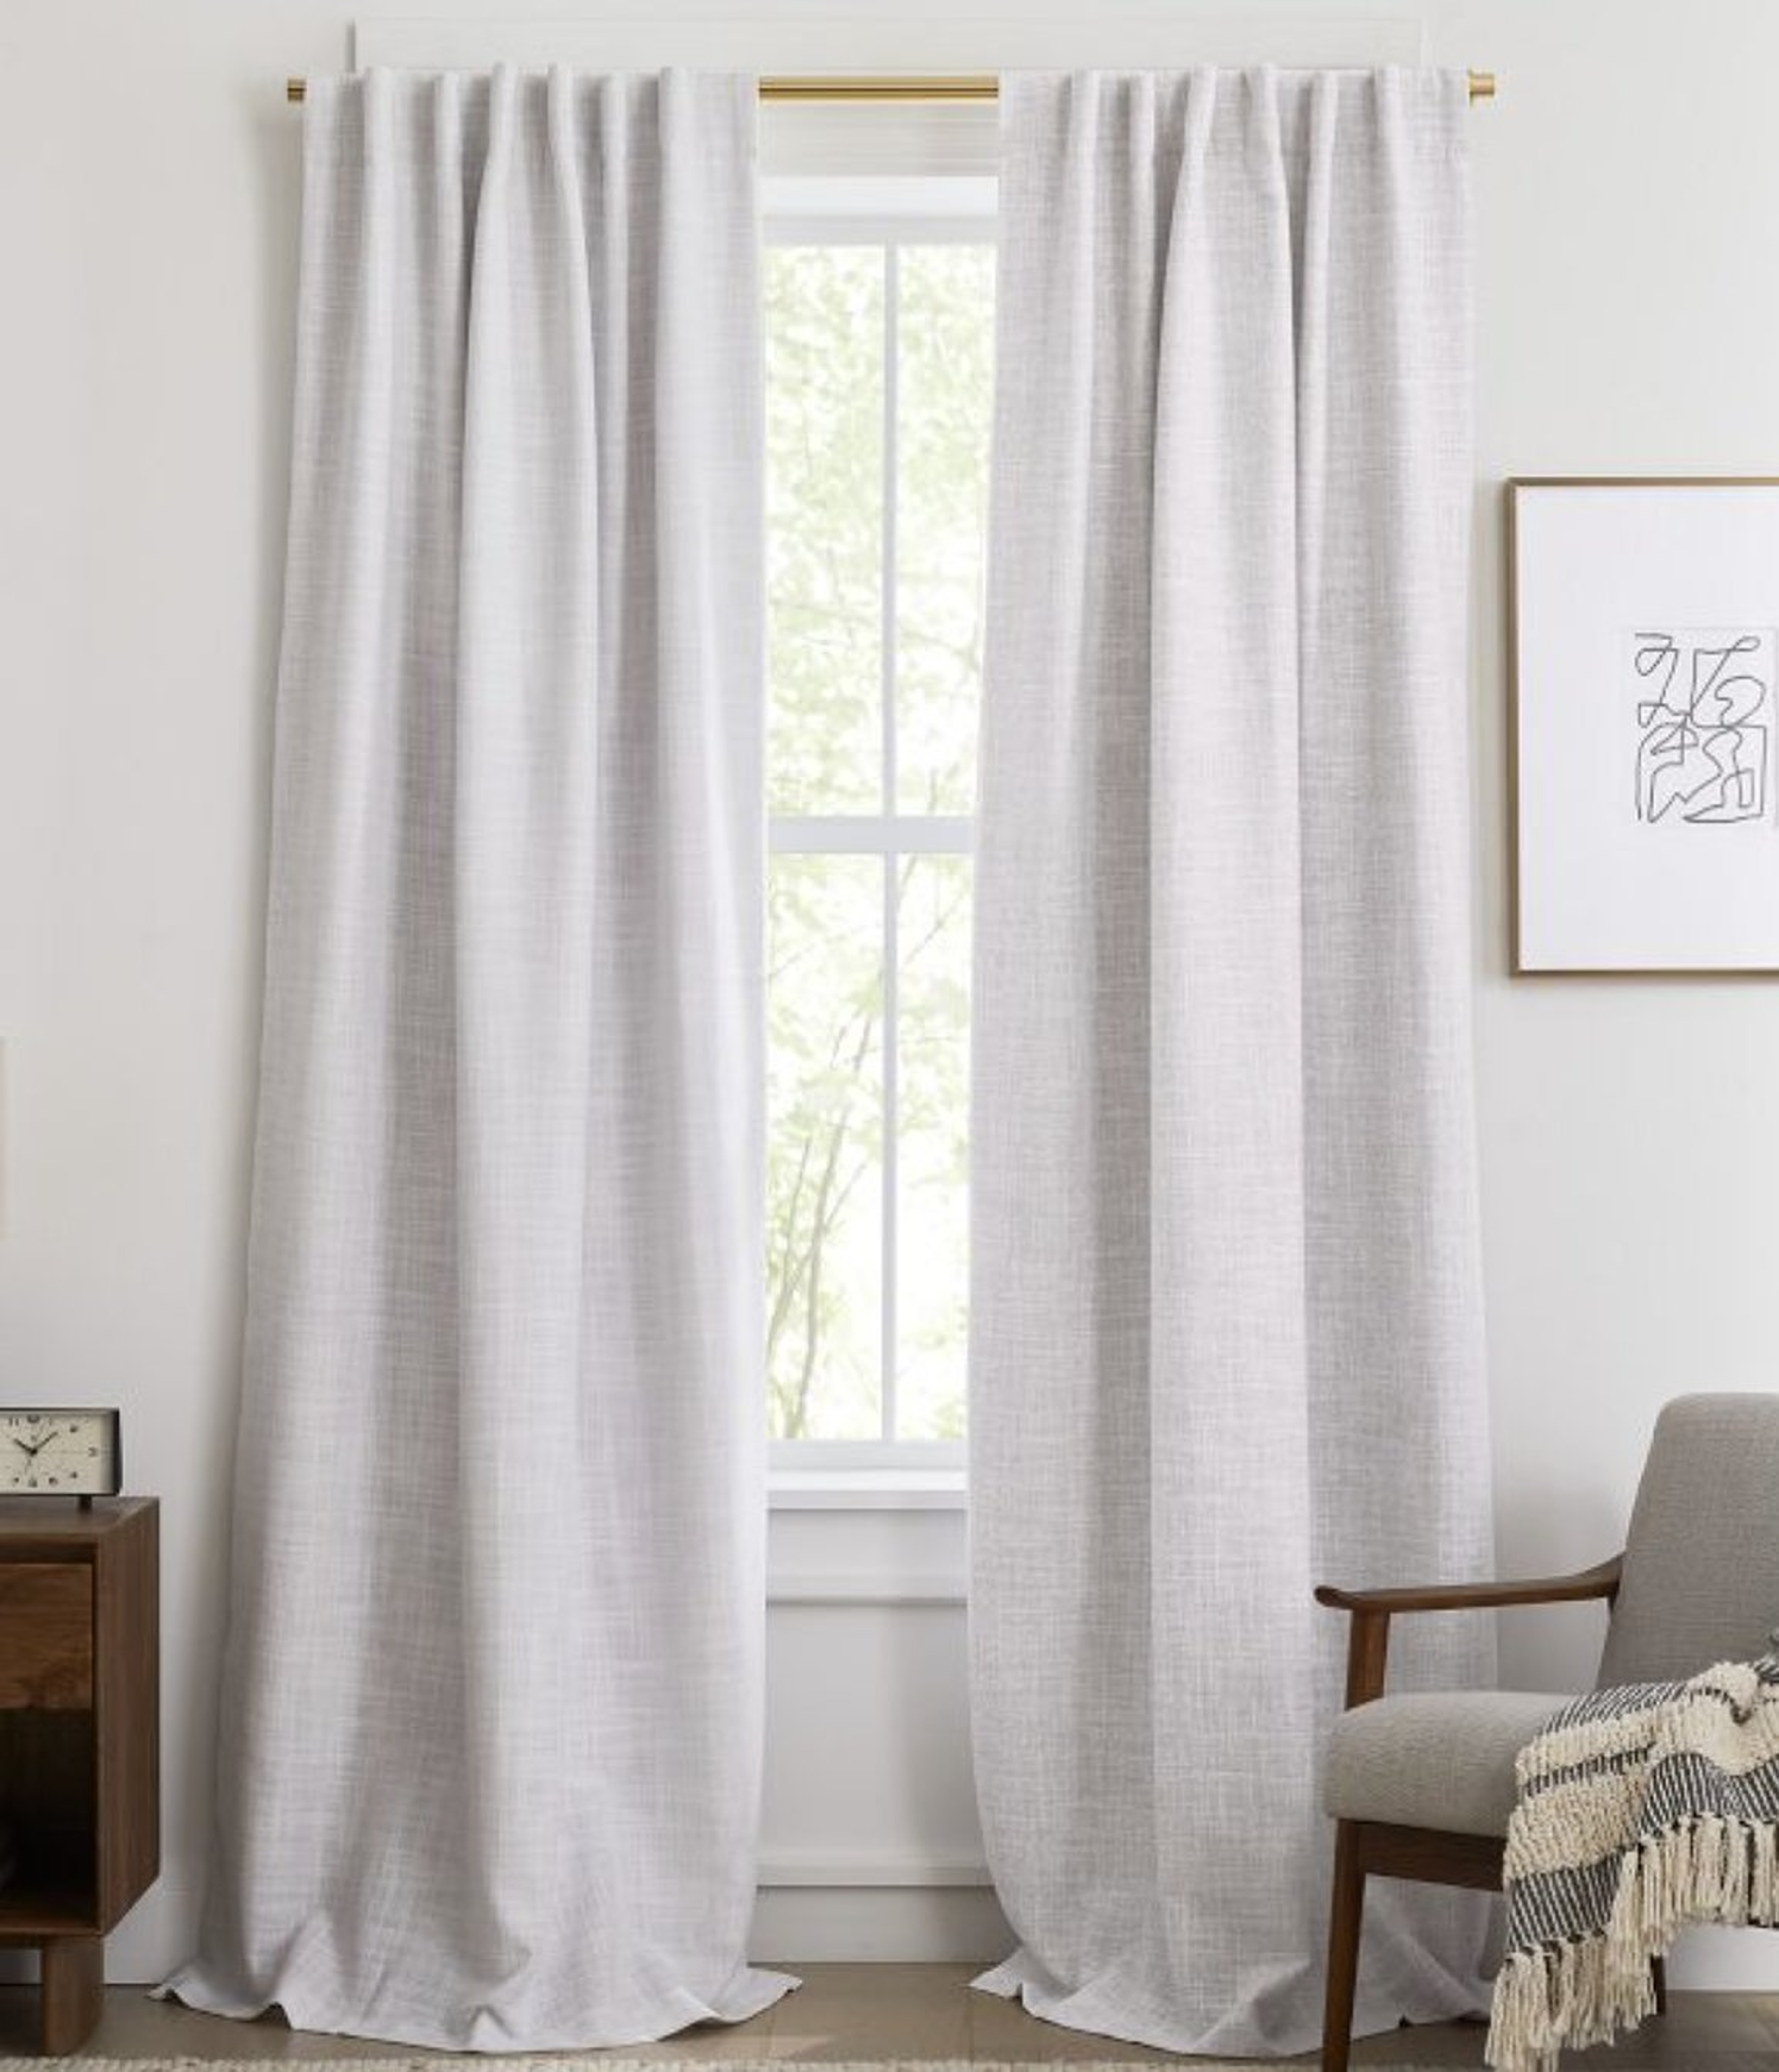 Crossweave Curtain with Blackout Lining, Stone White, 48"x96", Set of 2 - West Elm